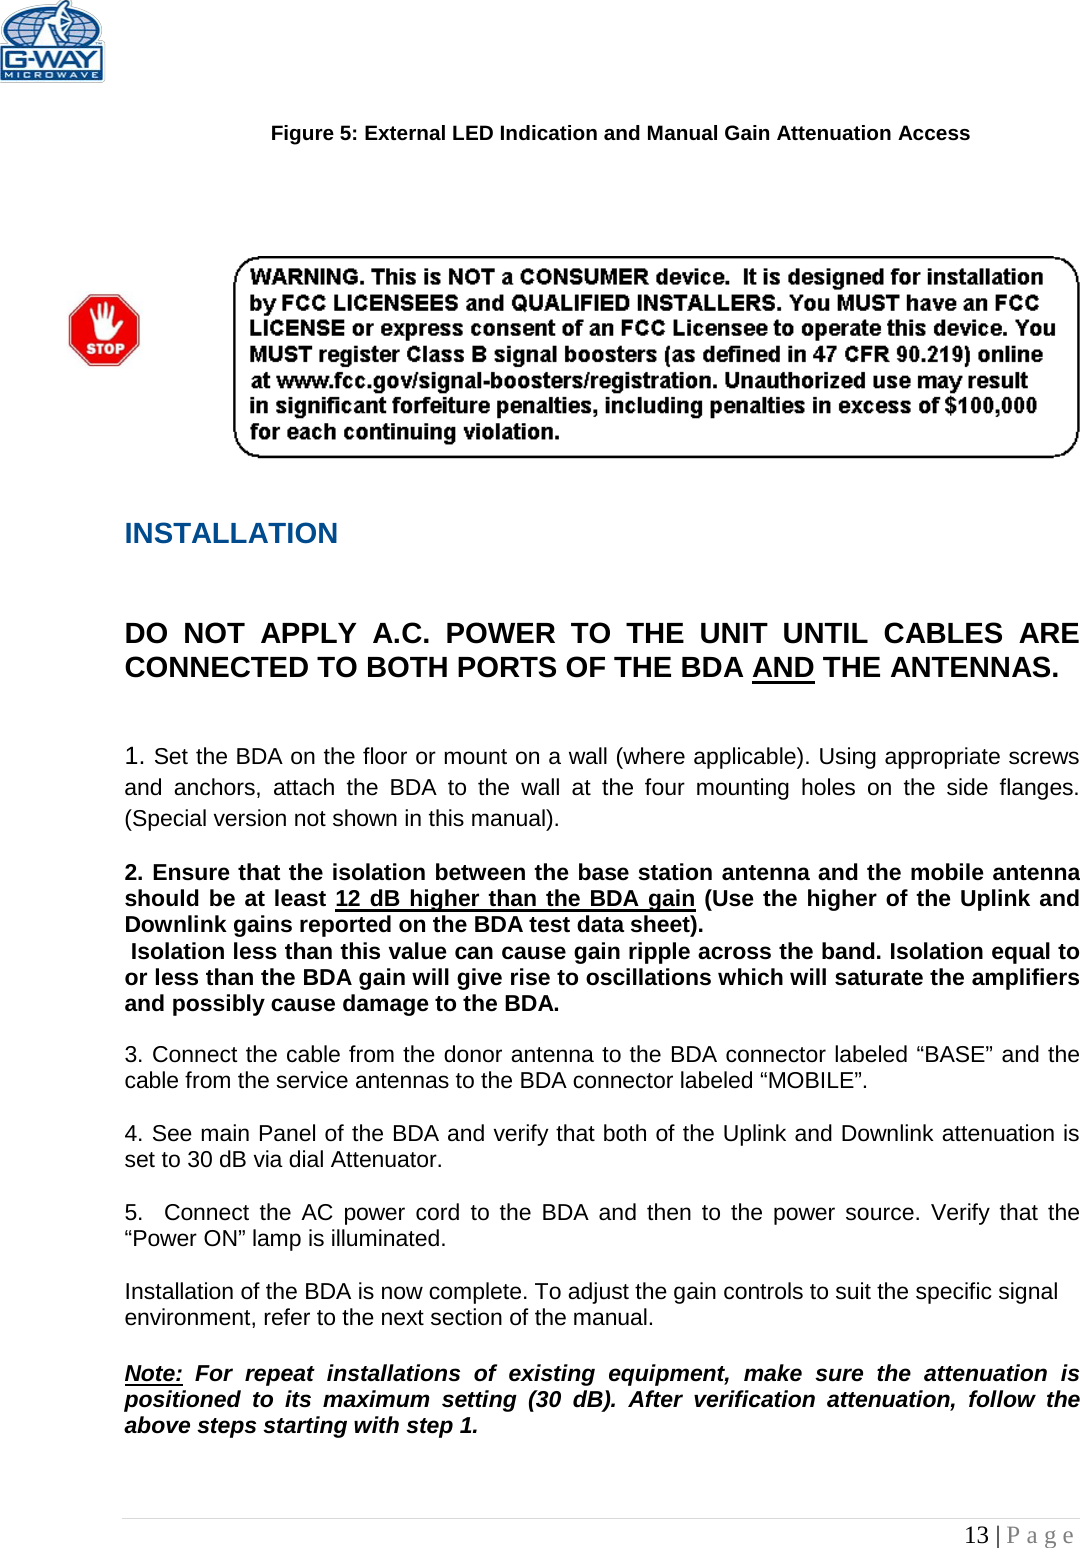   13 | Page   Figure 5: External LED Indication and Manual Gain Attenuation Access      INSTALLATION   DO NOT APPLY A.C. POWER TO THE UNIT UNTIL CABLES ARE CONNECTED TO BOTH PORTS OF THE BDA AND THE ANTENNAS.    1. Set the BDA on the floor or mount on a wall (where applicable). Using appropriate screws and anchors, attach the BDA to the wall at the four mounting holes on the side flanges. (Special version not shown in this manual).  2. Ensure that the isolation between the base station antenna and the mobile antenna should be at least 12 dB higher than the BDA gain (Use the higher of the Uplink and Downlink gains reported on the BDA test data sheet).  Isolation less than this value can cause gain ripple across the band. Isolation equal to or less than the BDA gain will give rise to oscillations which will saturate the amplifiers and possibly cause damage to the BDA.   3. Connect the cable from the donor antenna to the BDA connector labeled “BASE” and the cable from the service antennas to the BDA connector labeled “MOBILE”.  4. See main Panel of the BDA and verify that both of the Uplink and Downlink attenuation is set to 30 dB via dial Attenuator.    5.  Connect the AC power cord to the BDA and then to the power source. Verify that the “Power ON” lamp is illuminated.   Installation of the BDA is now complete. To adjust the gain controls to suit the specific signal environment, refer to the next section of the manual.  Note: For repeat installations of existing equipment, make sure the attenuation is positioned to its maximum setting (30 dB). After verification attenuation, follow the above steps starting with step 1.   